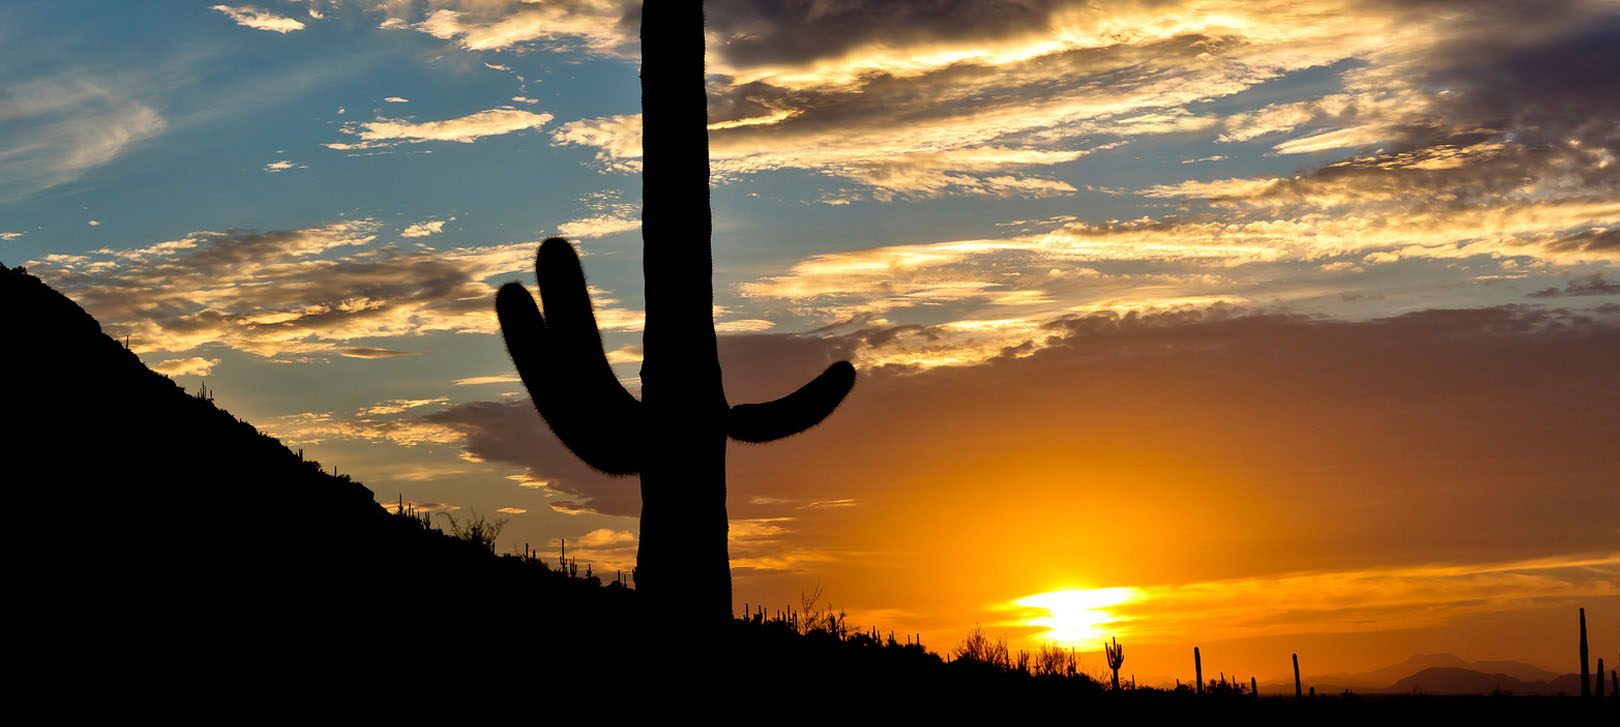 The sun sets through a saguaro's arms behind the mountain at Picacho Peak